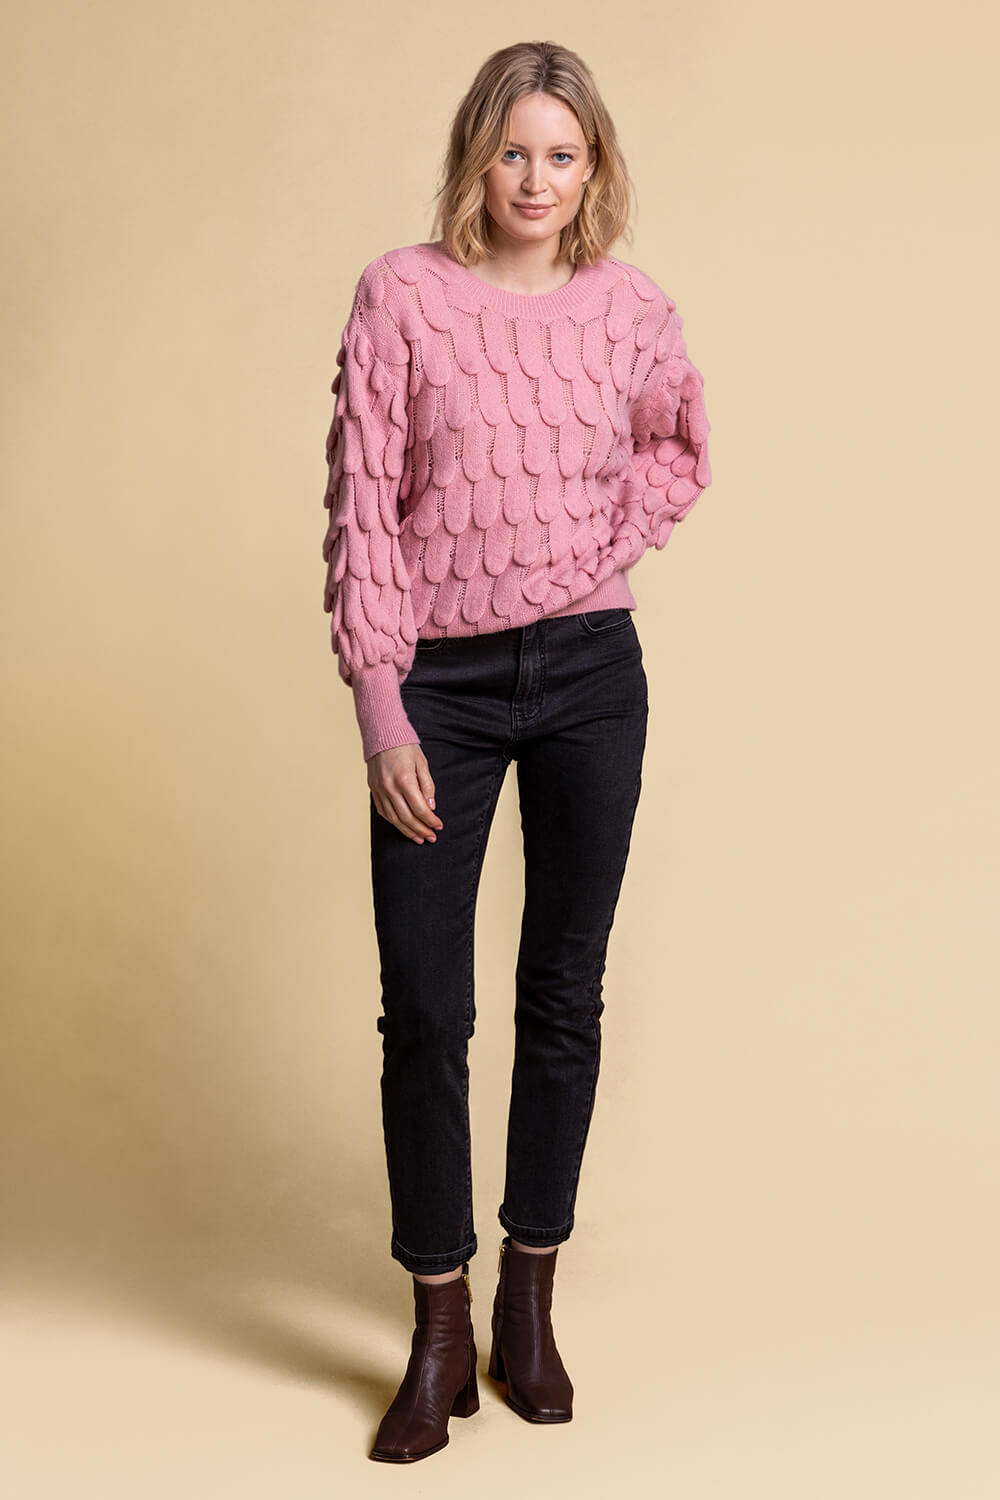 Rose Scallop Textured Knit Jumper, Image 3 of 5